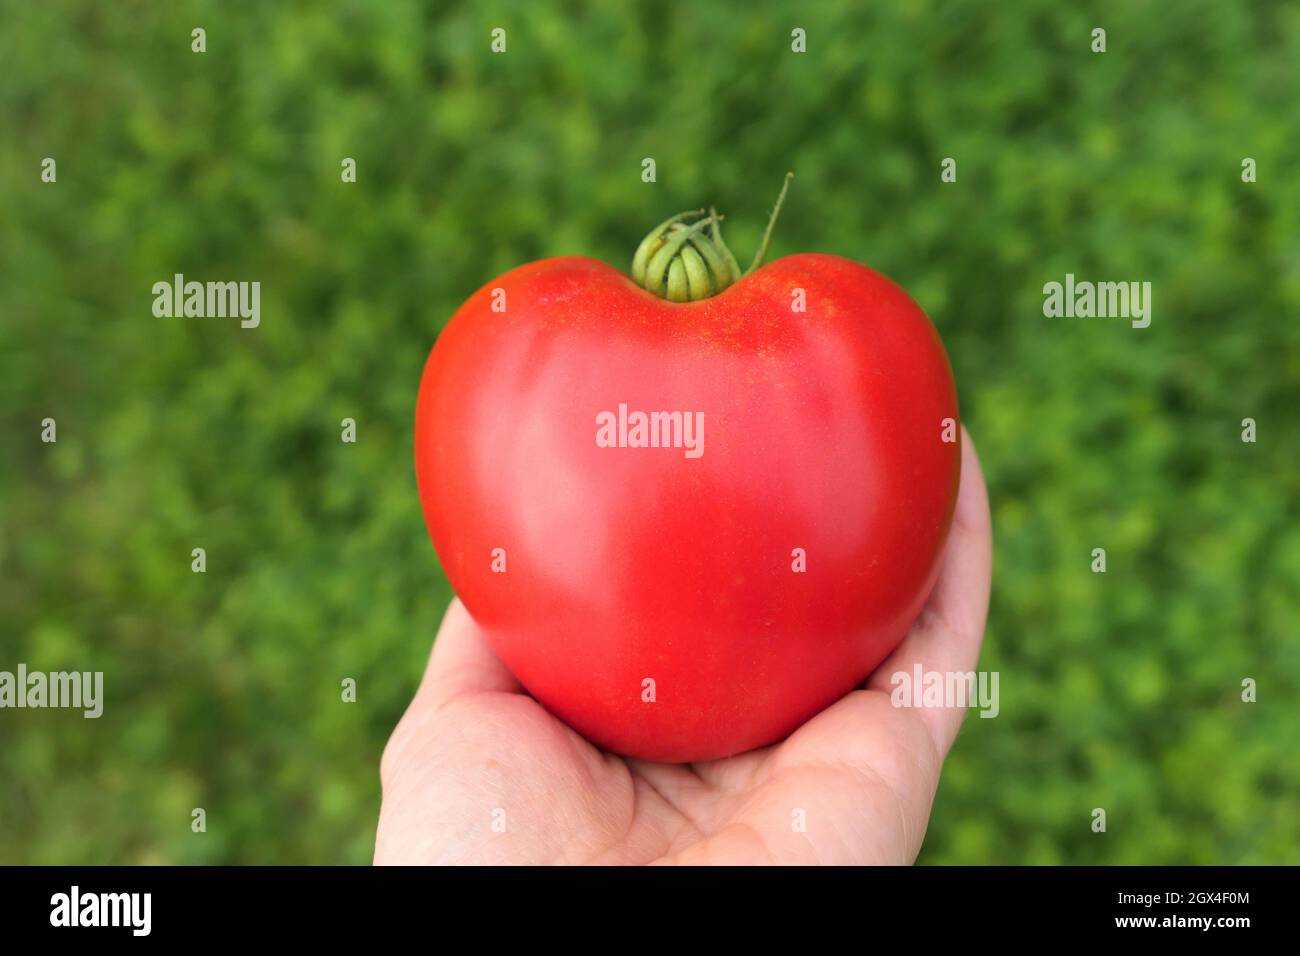 Red heirloom tomato, heart shape in hand, Oxheart variety. Stock Photo